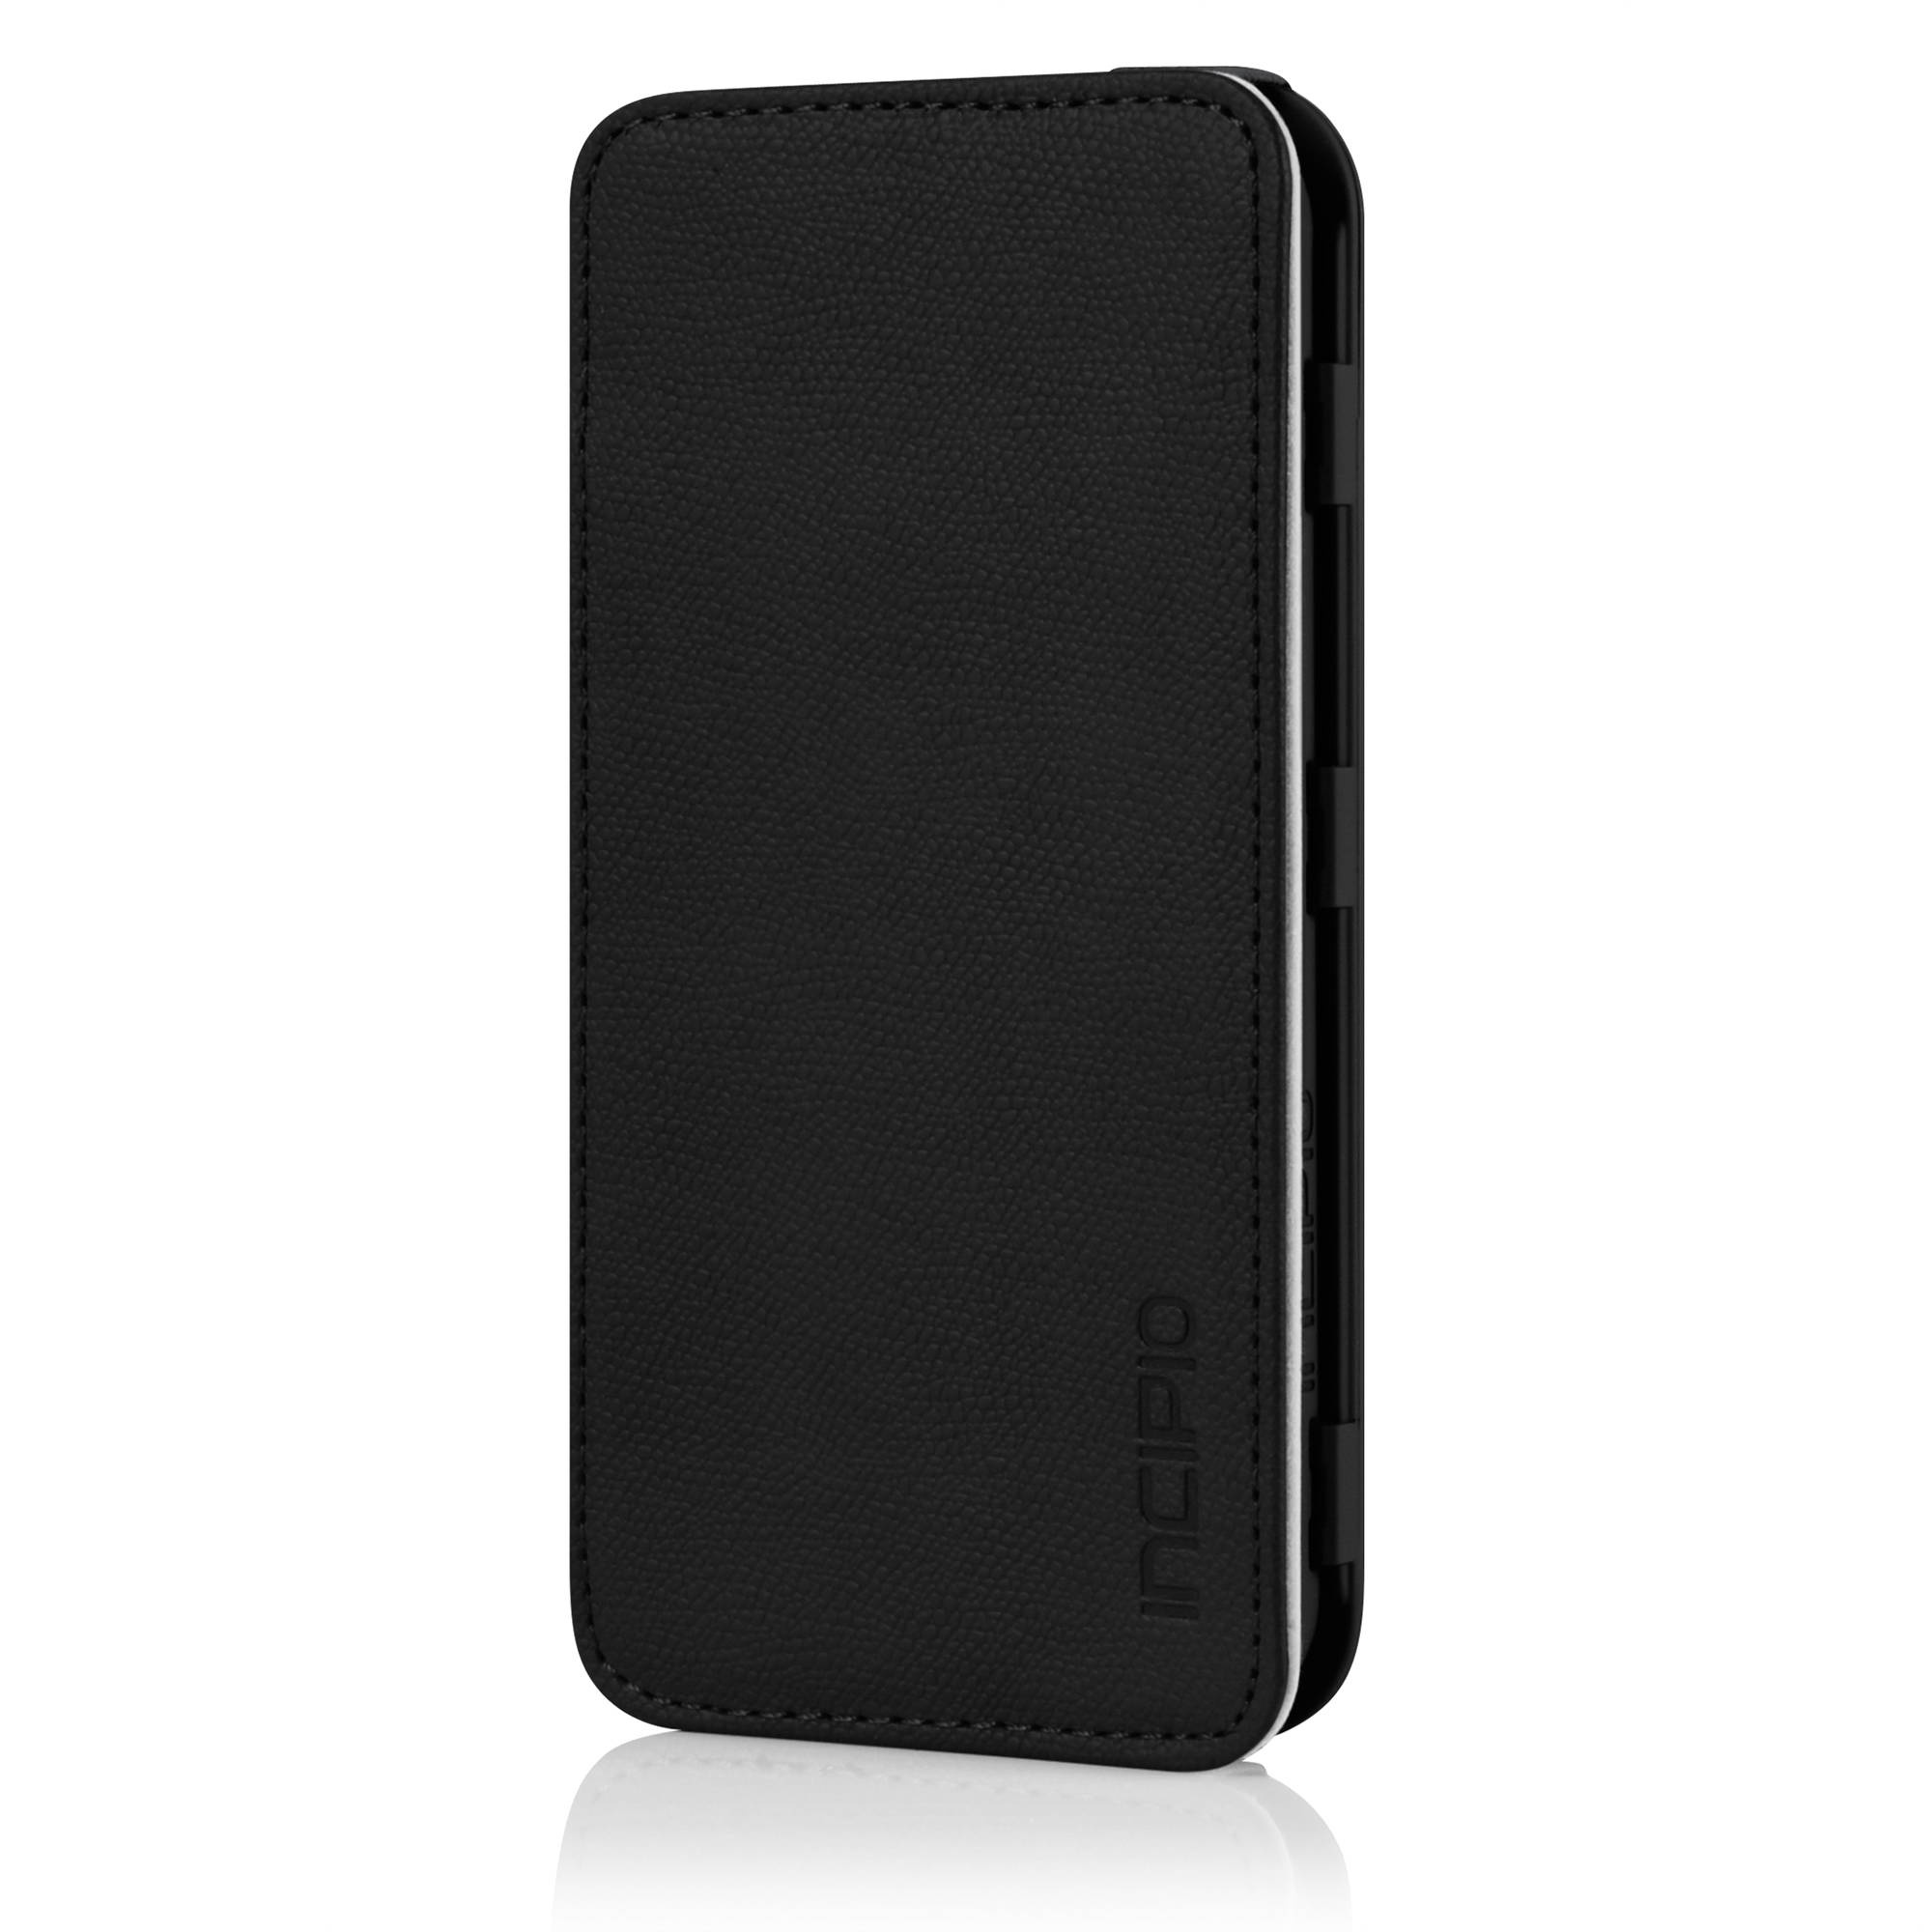 Incipio Watson Wallet Folio with Removable Cover for iPhone 5/5s (Black)